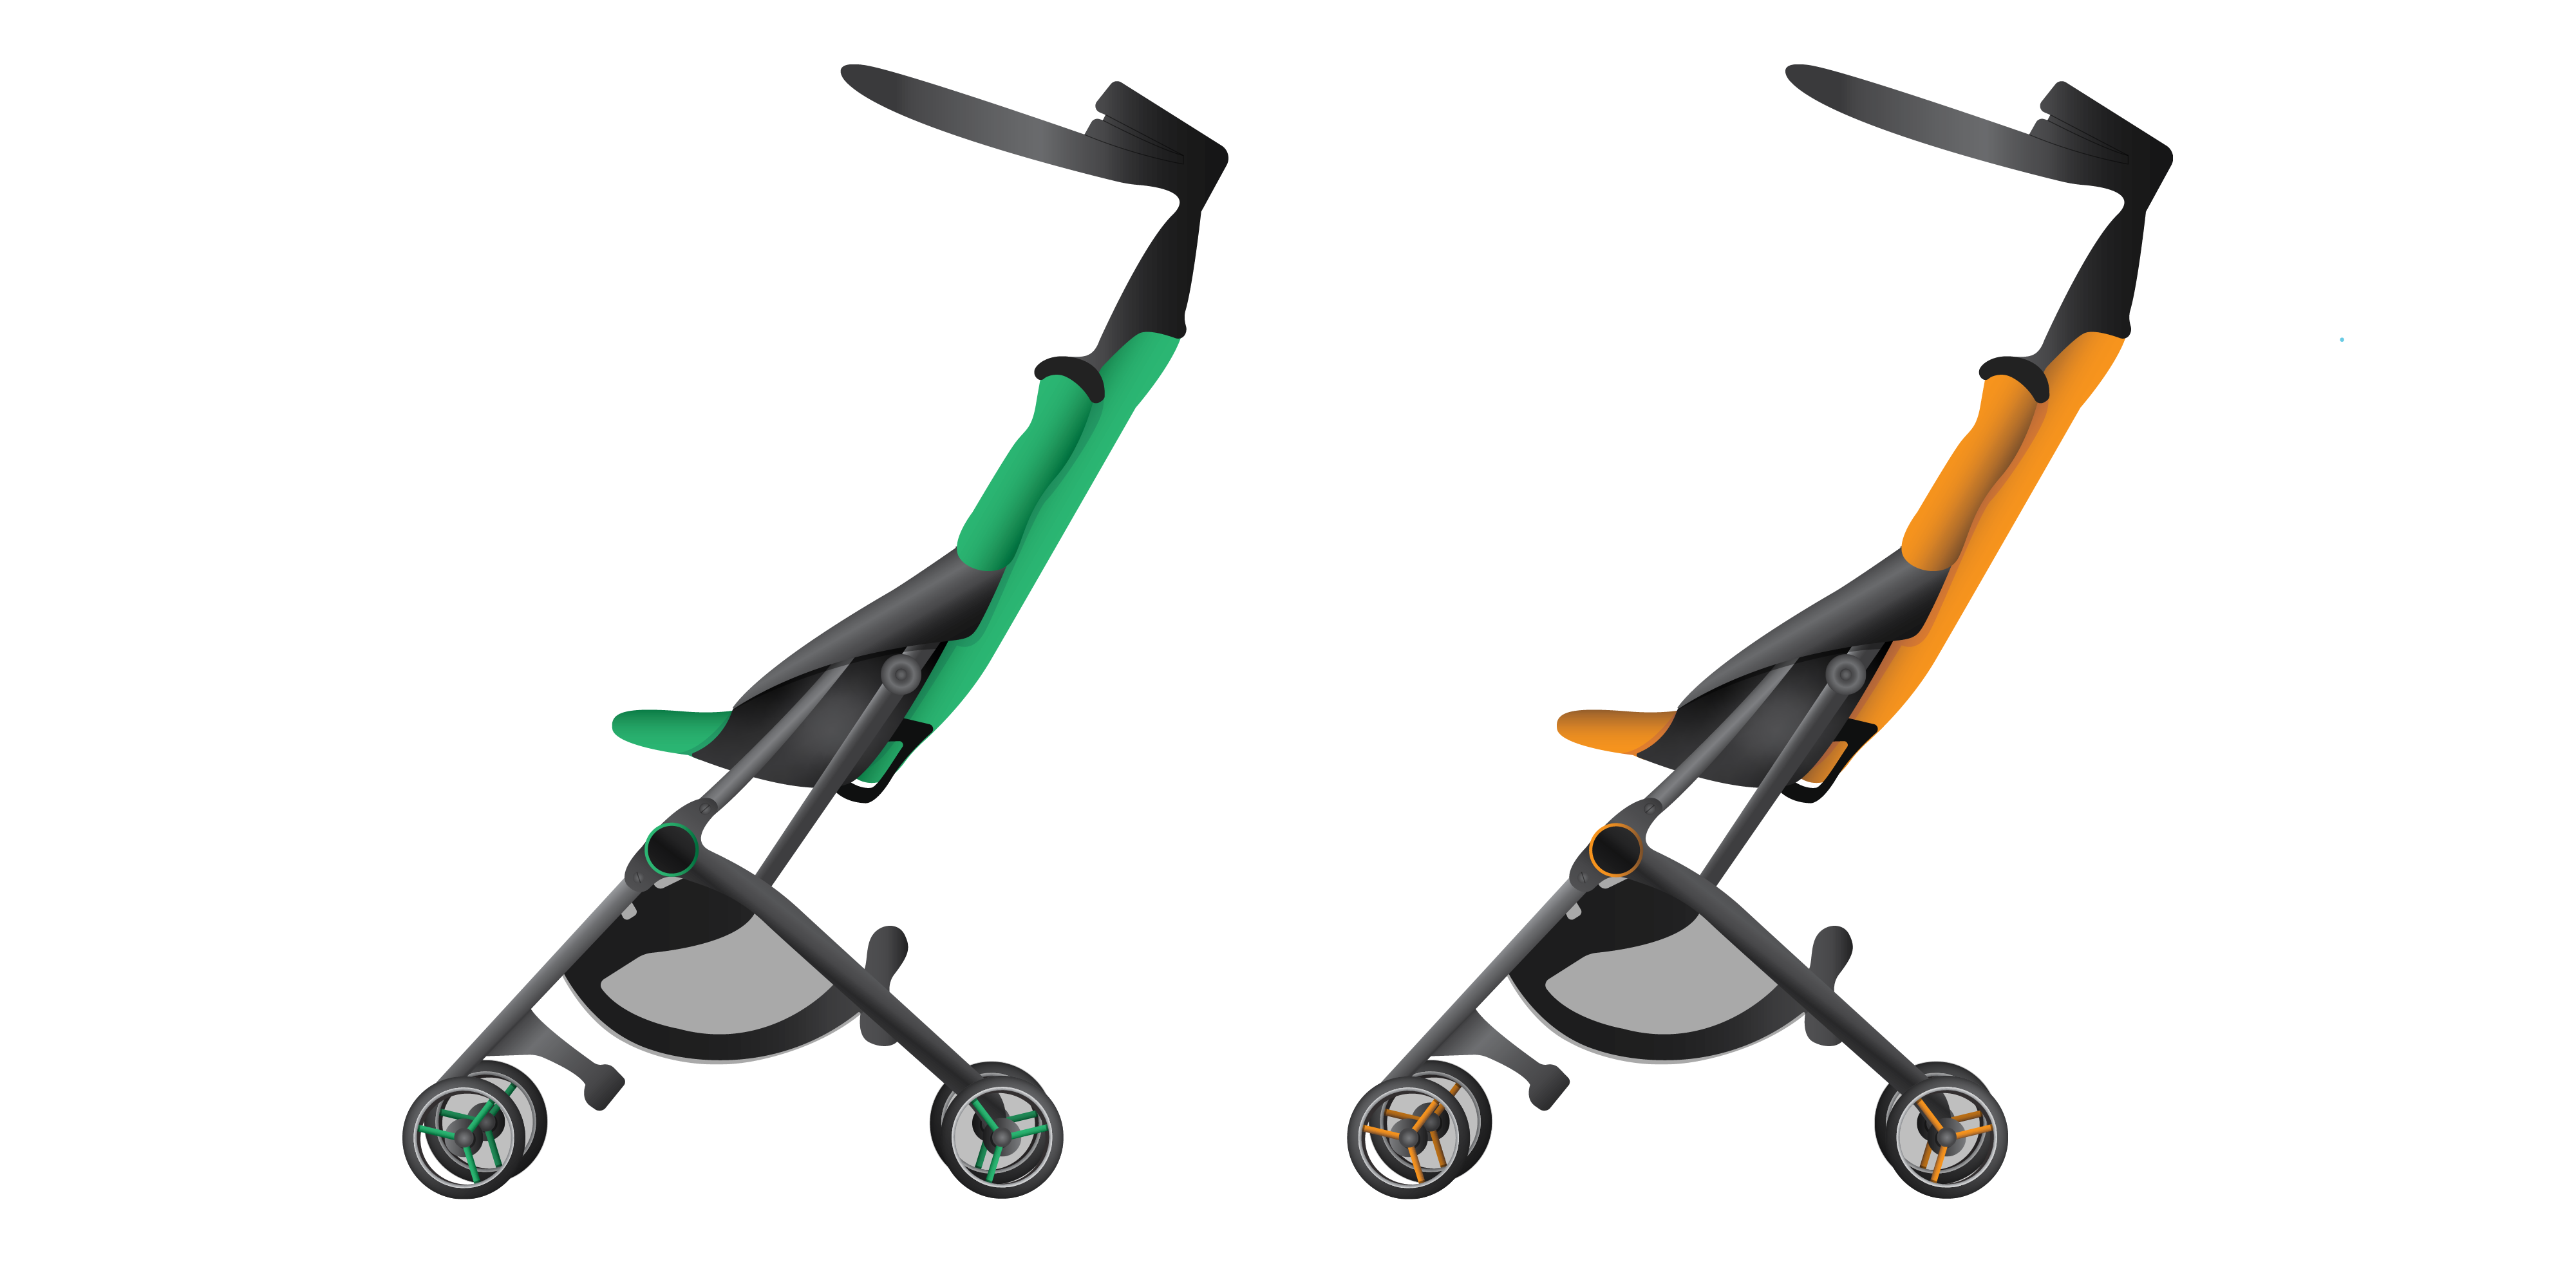 Two collapsible baby strollers. The stroller on the left has green colour accents and the one on the right has orange colour accents. Both have black and grey structural elements and wheels.